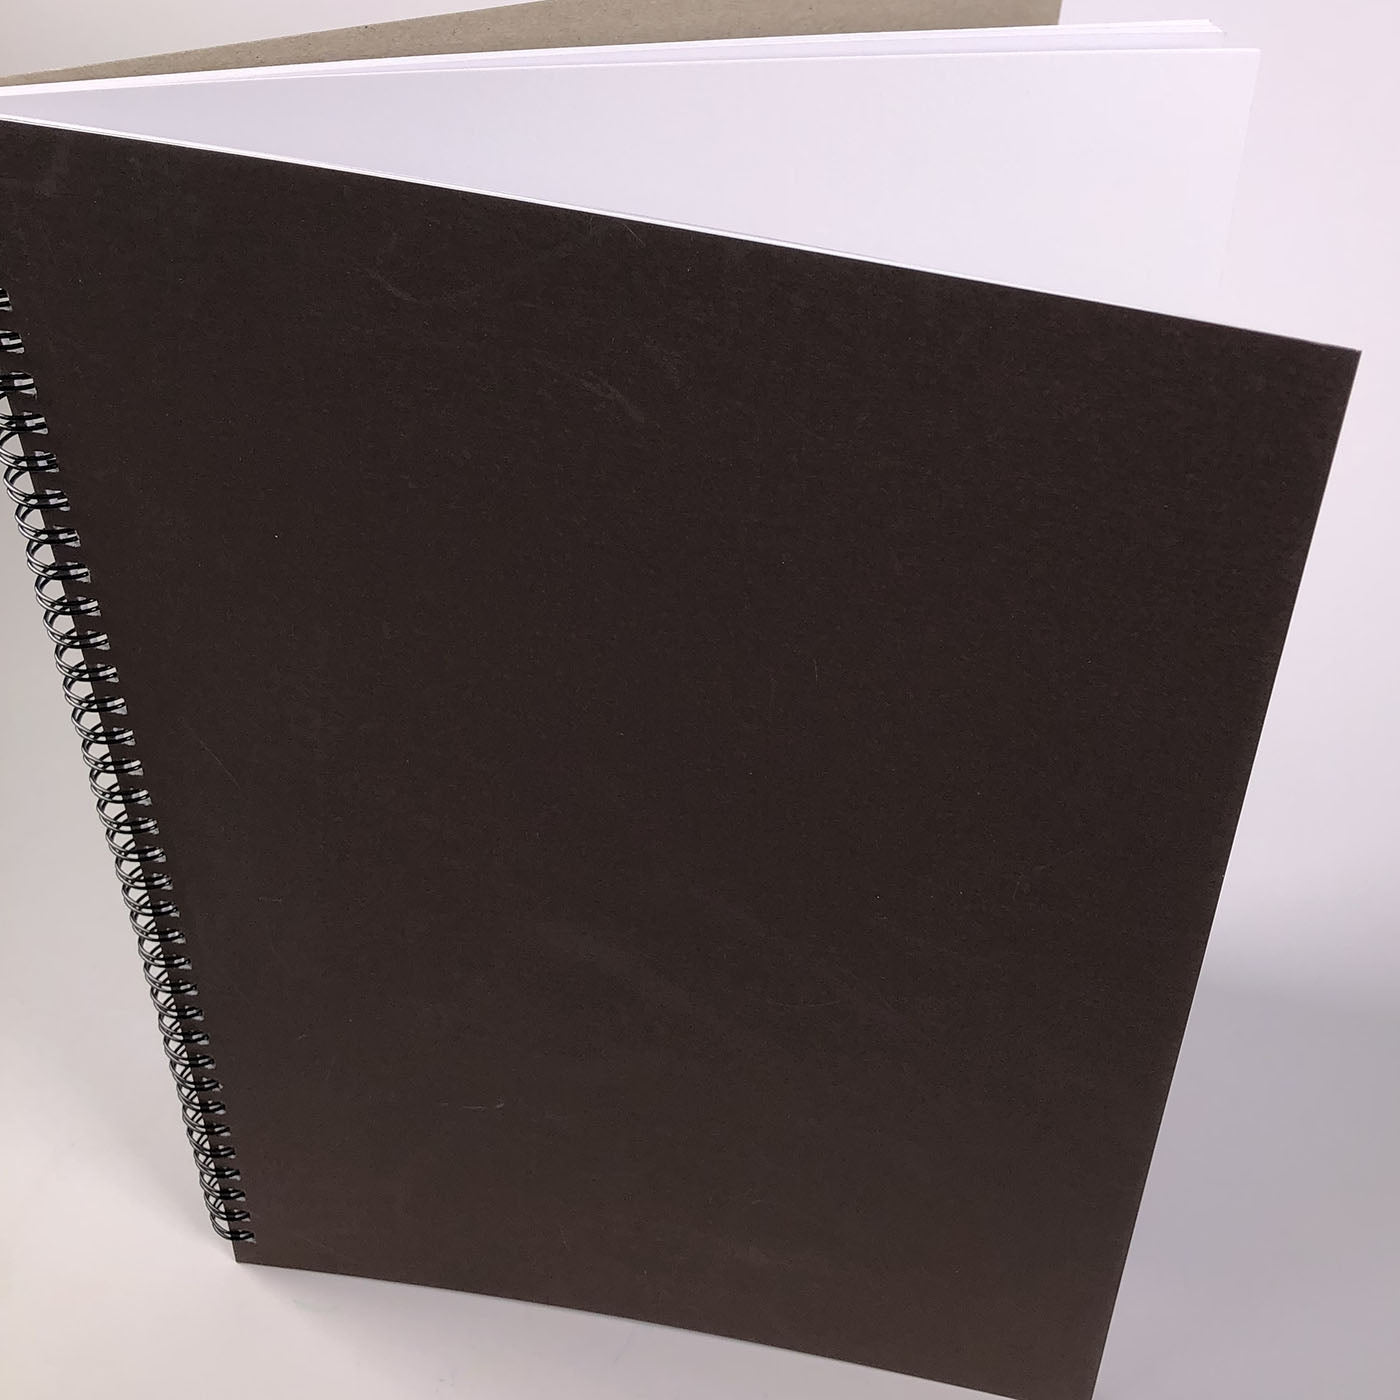 Scrap Books perfect for displaying Topic Work - Black Cover 20 White Pages